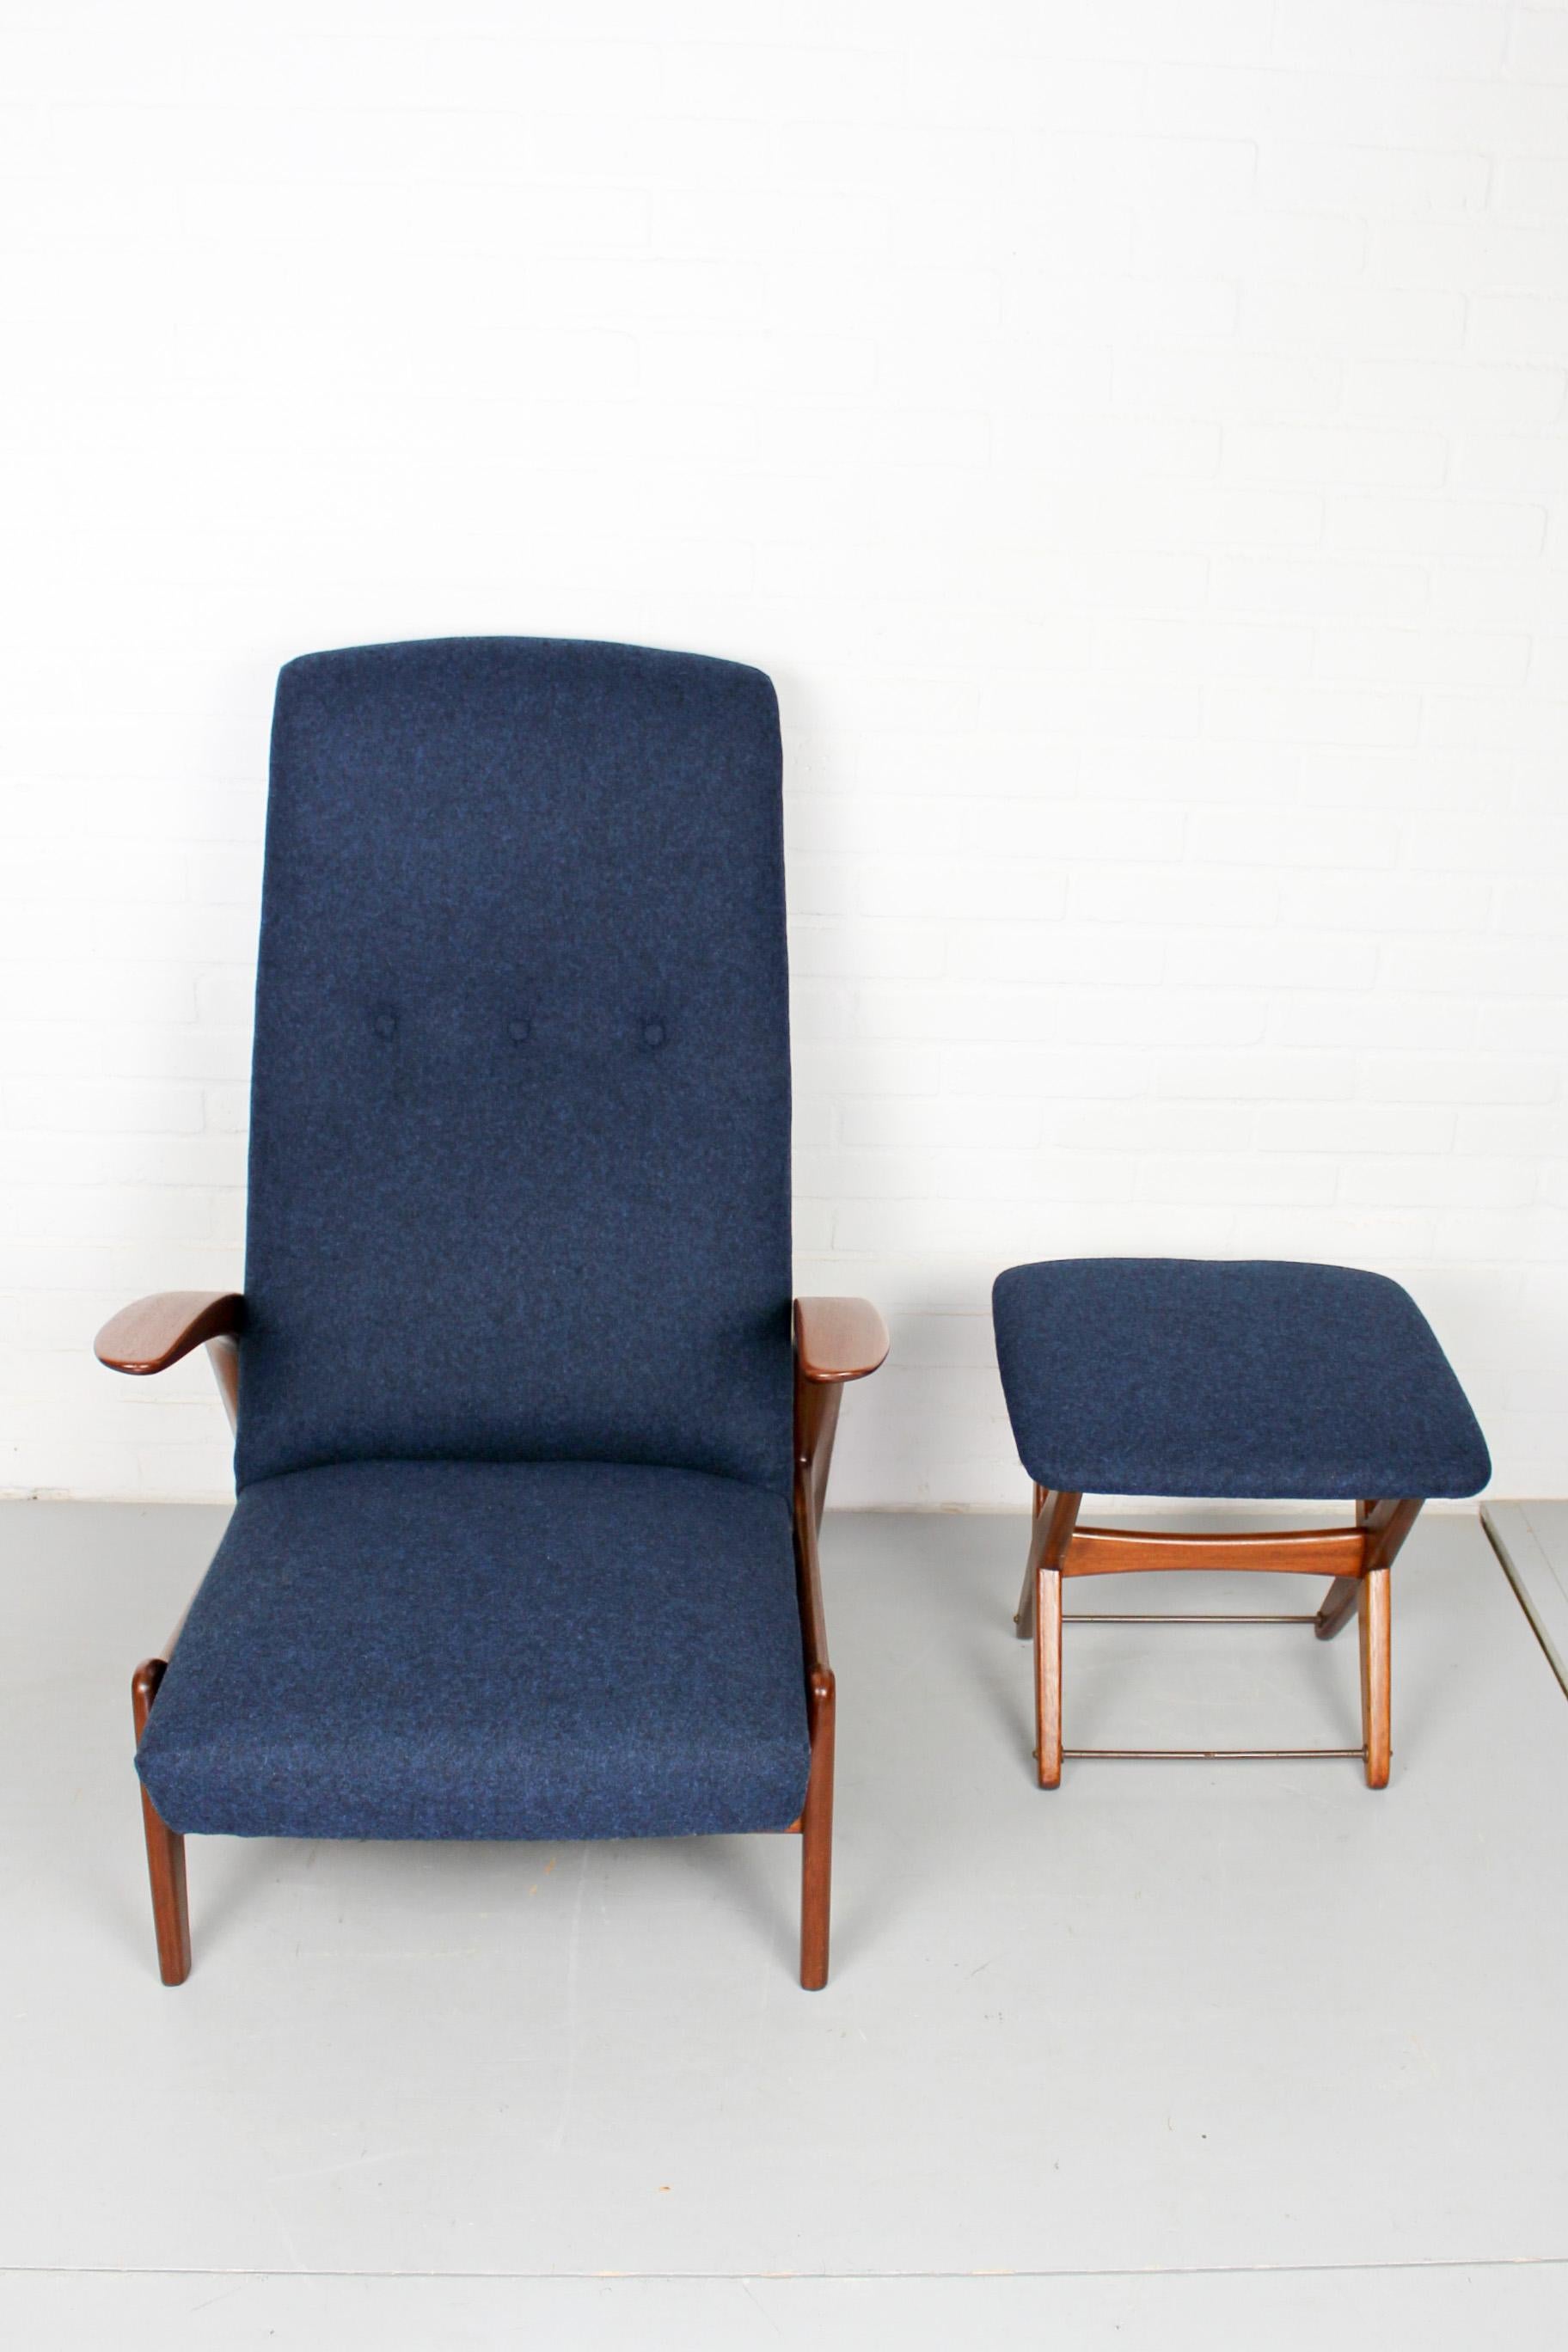 Wool Rock n Rest Lounge Chair and Foot Stool by Gimson & Slater, circa 1960